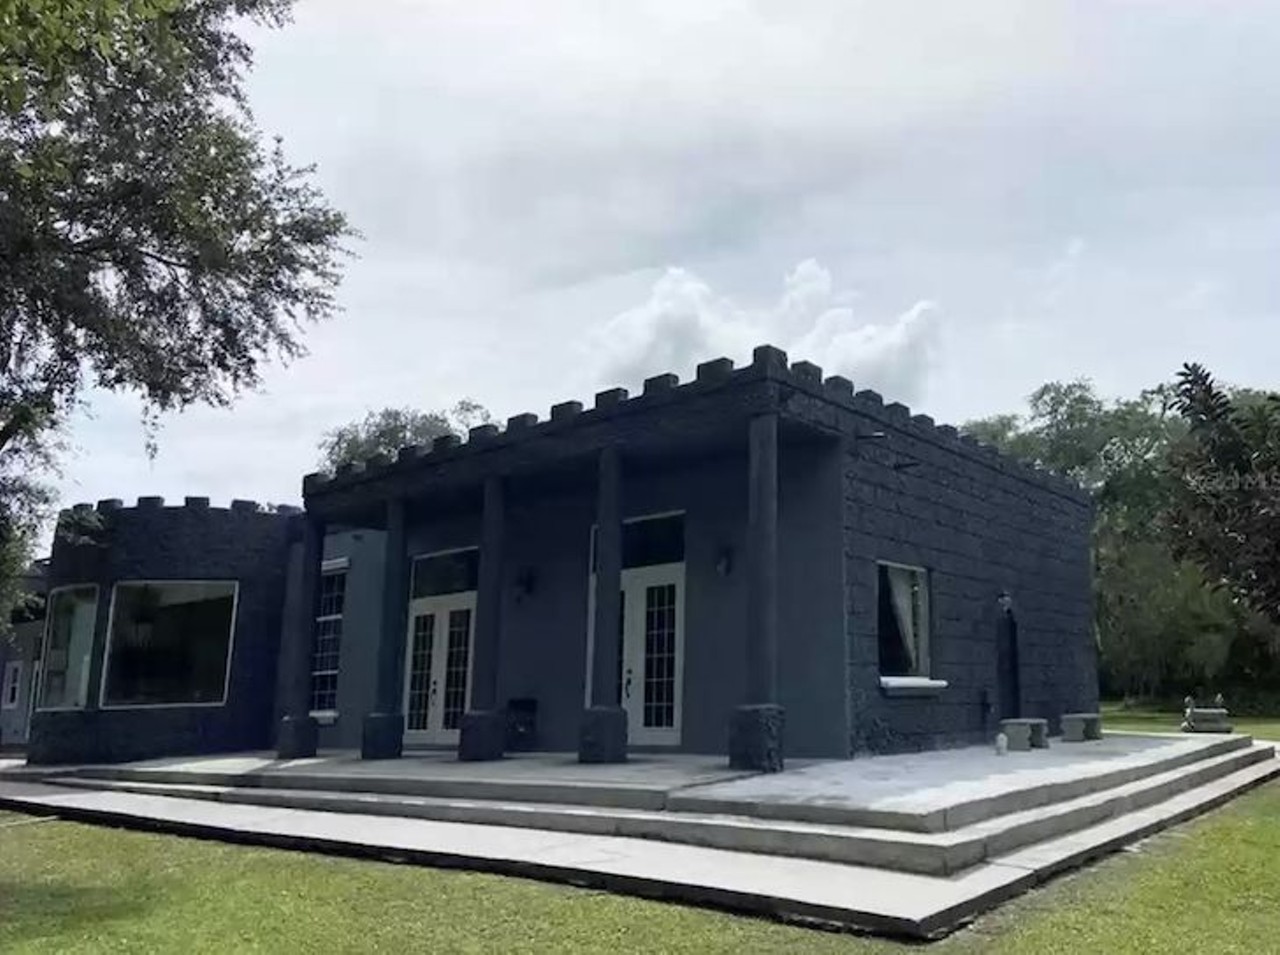 A castle in Kissimmee fetches $1.1 million offer